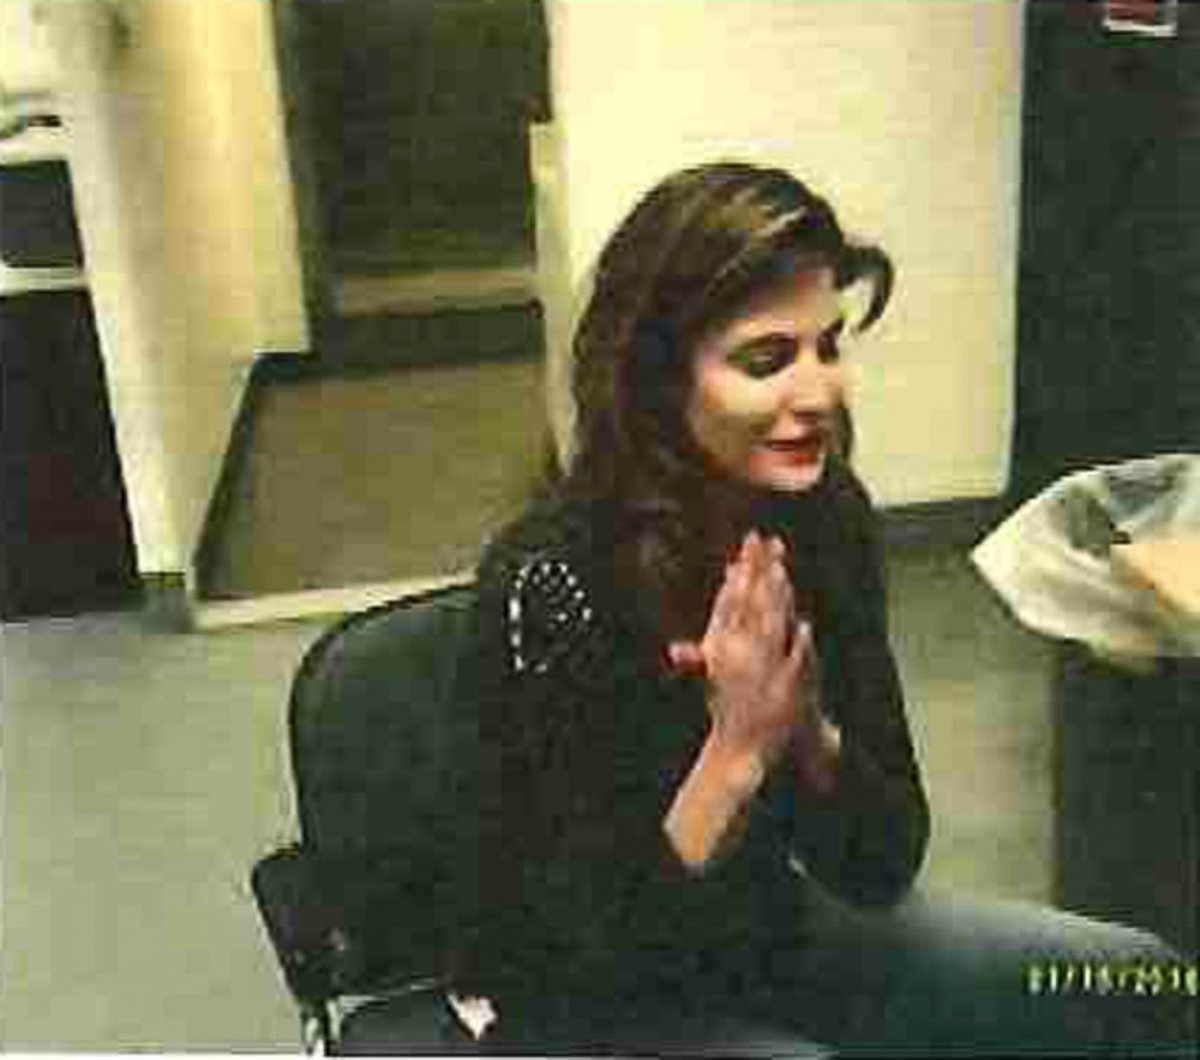 PHOTO: Supermodel Stephanie Seymour, seen here in a Jan. 15, 2016 photo provided by Connecticut State Police, was arrested for allegedly driving under the influence on Friday night, according to paperwork obtained by ABC News.